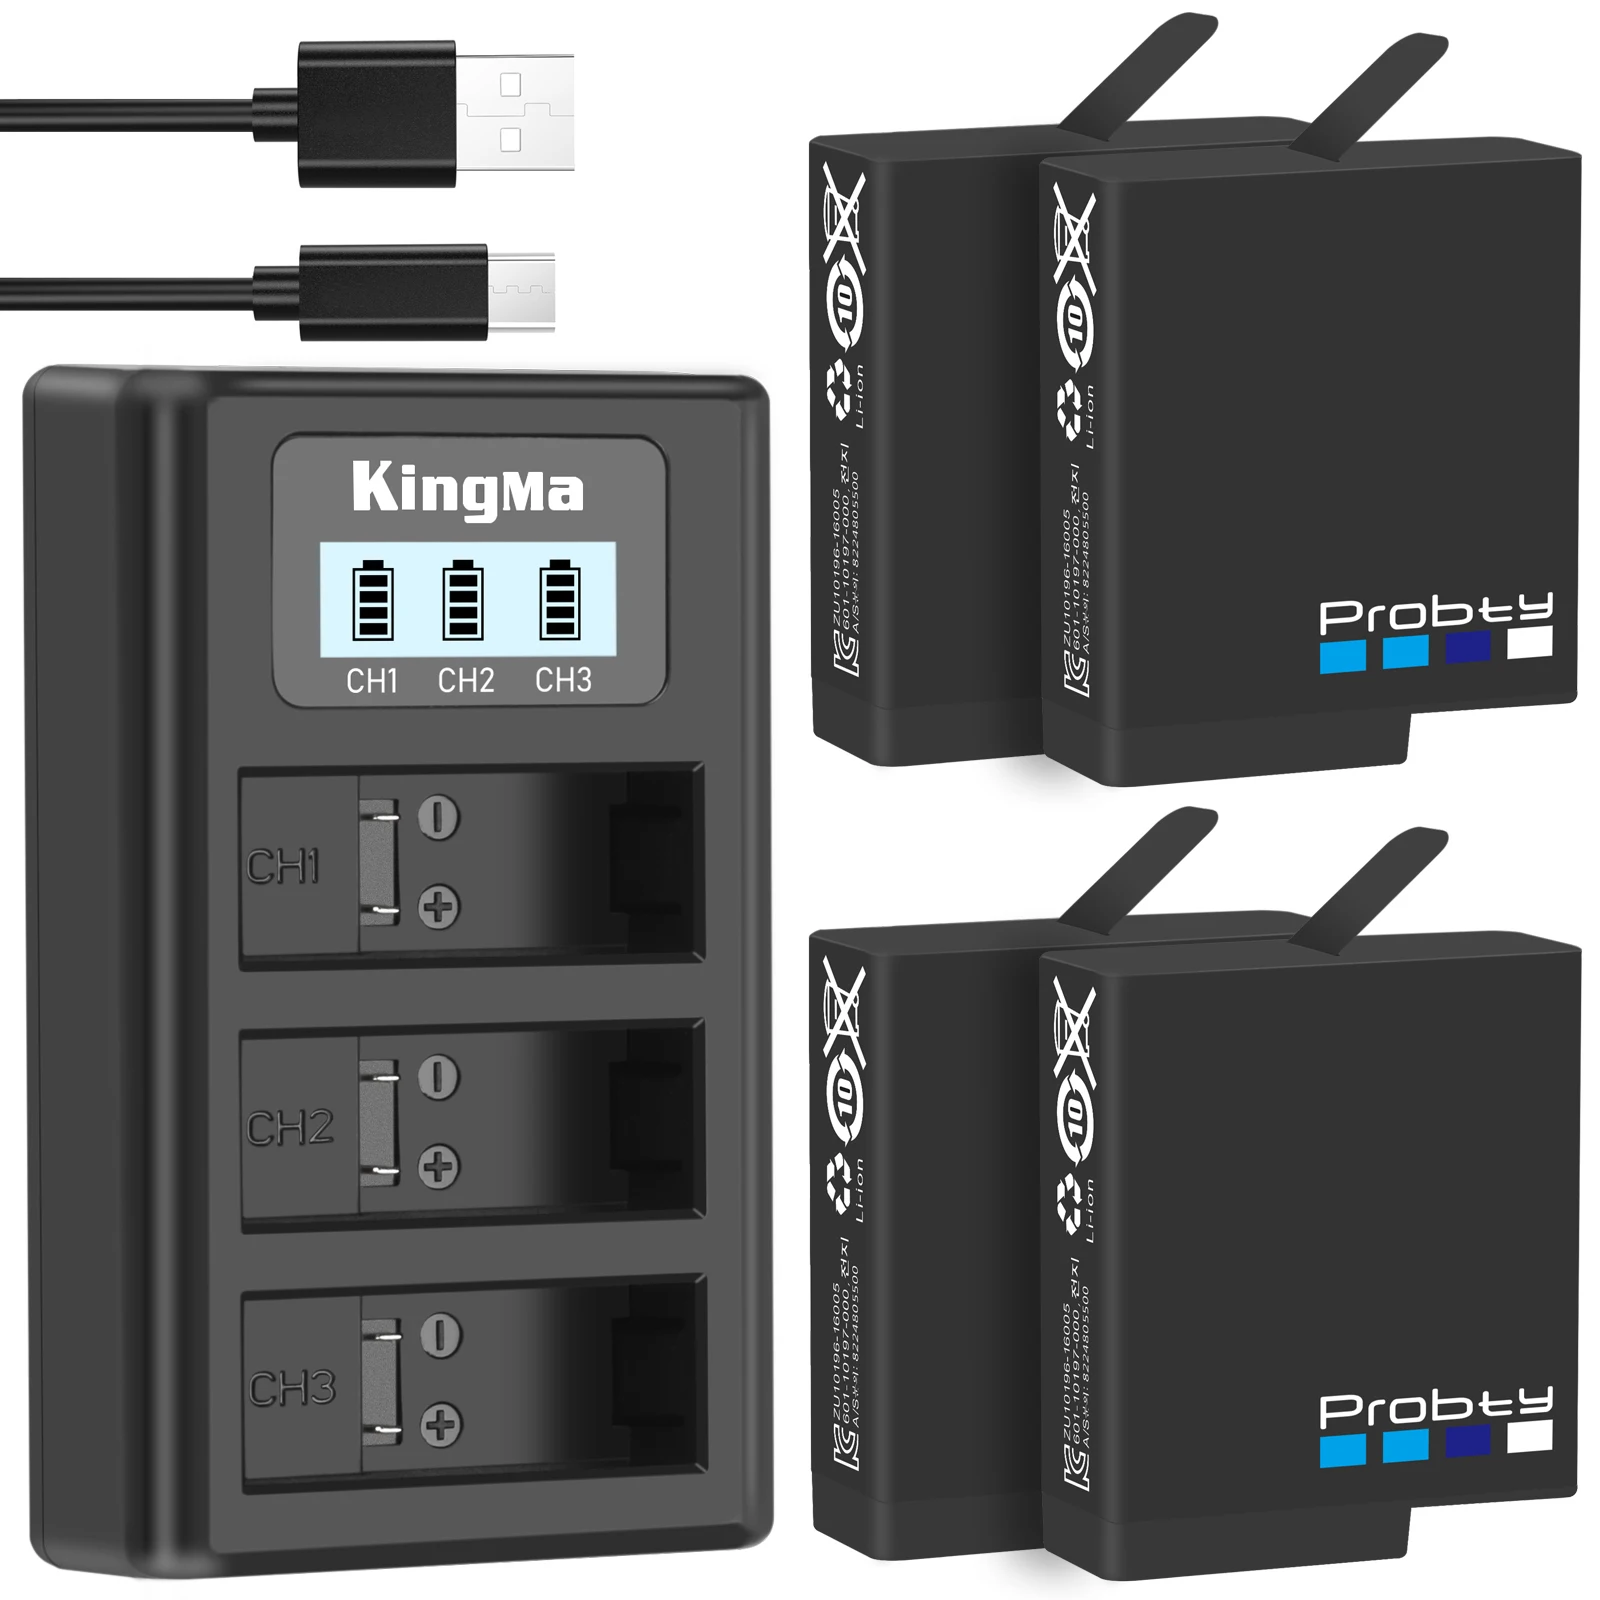 2 BATTERIES & BE A HERO STICKER GoPro KINGMA GOPRO MAX BATTERY AND CHARGER KIT 